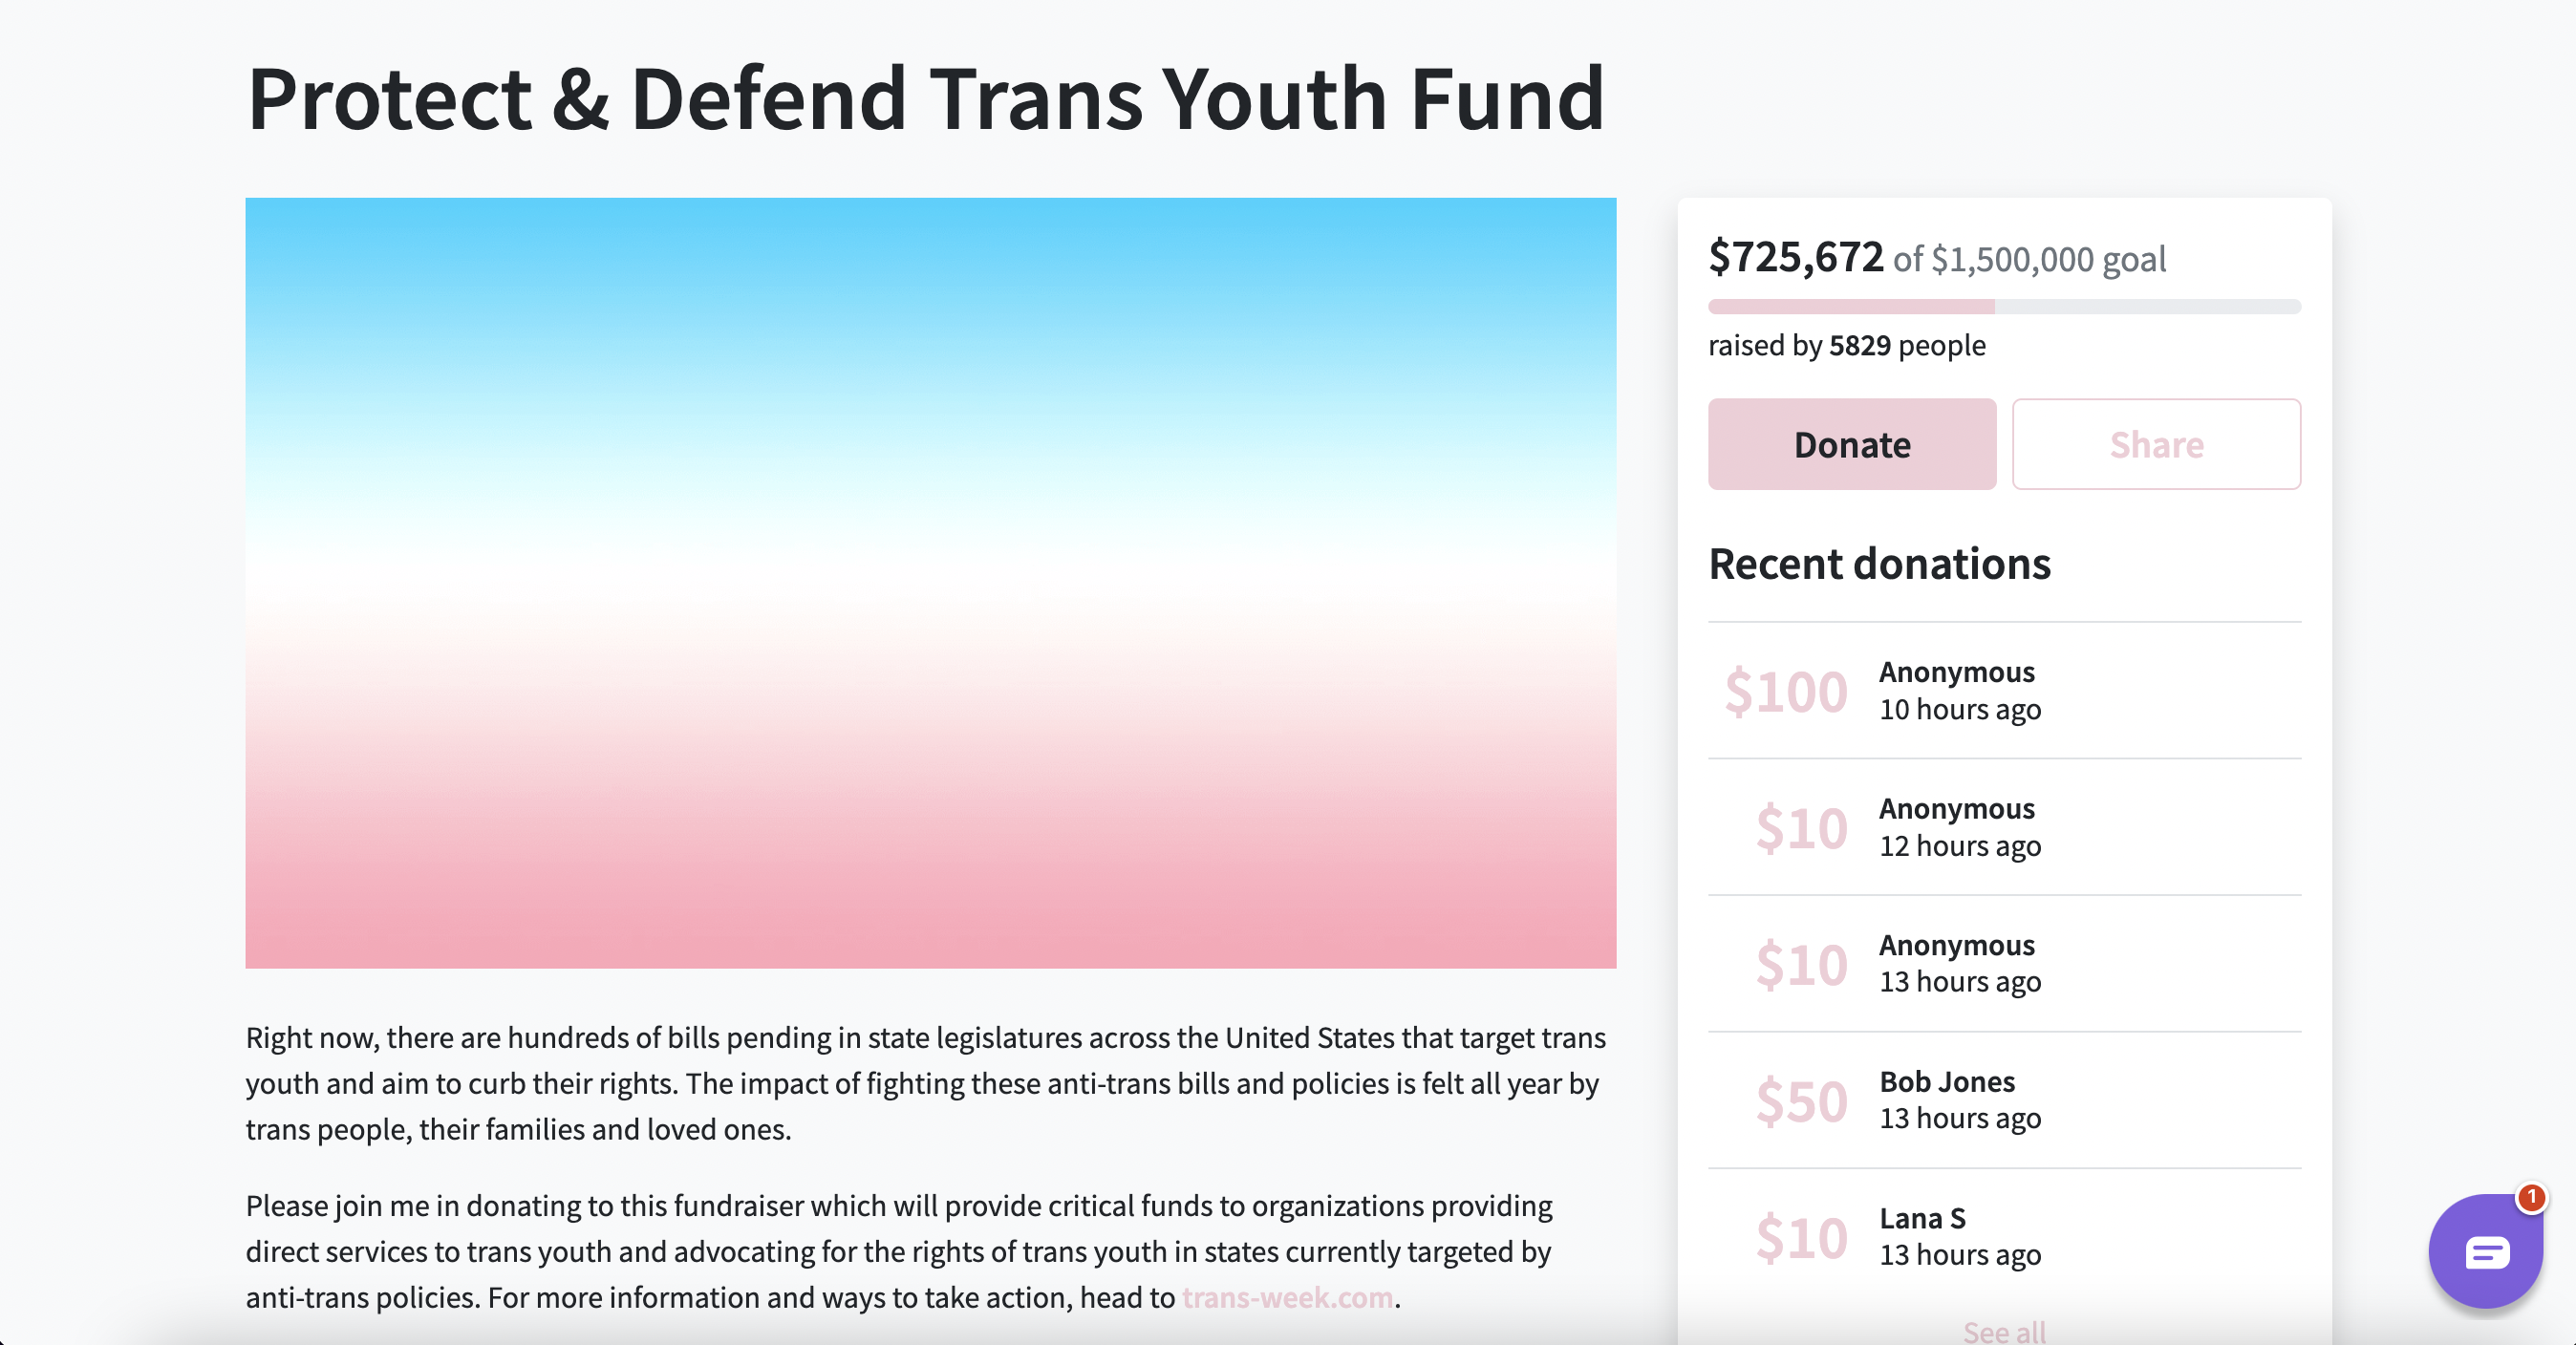 Ariana Protect & Defend Trans Youth Fund